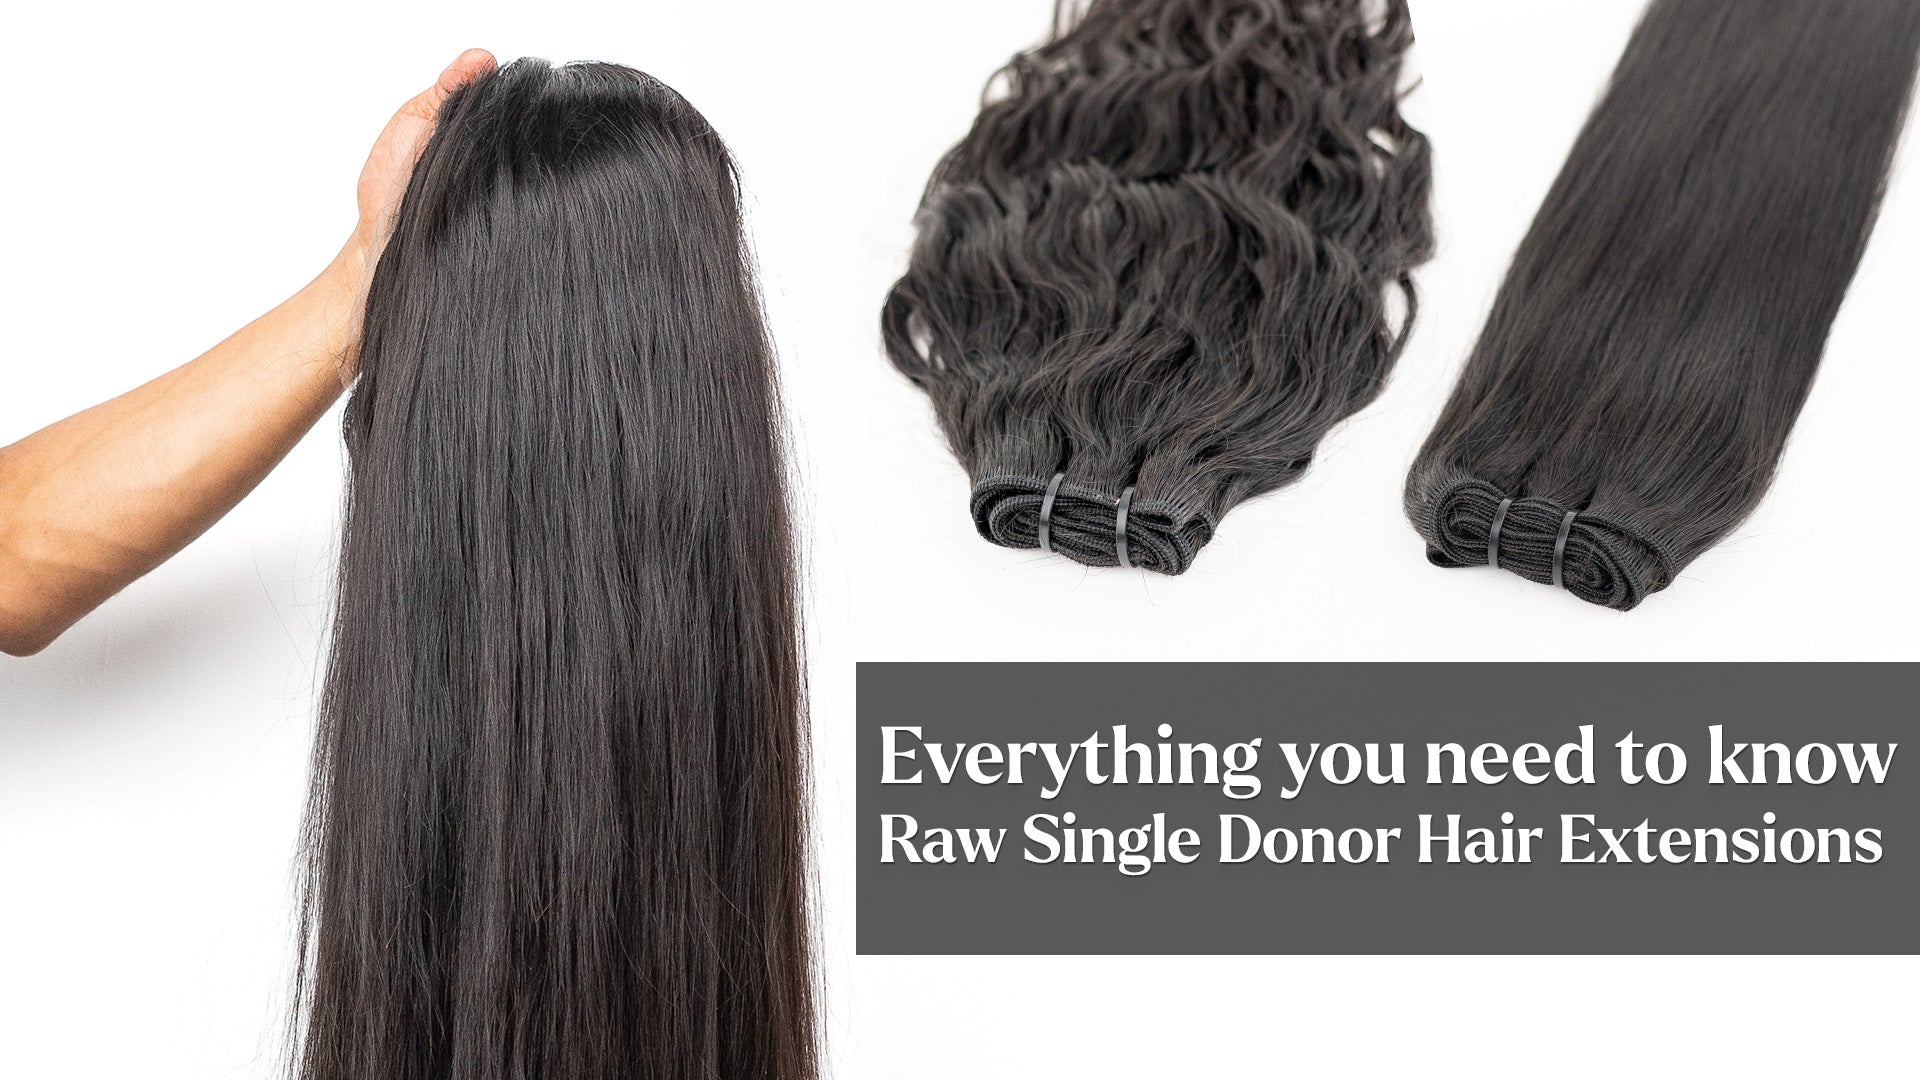 Everything you need to know about: Raw Single Donor Hair Extensions